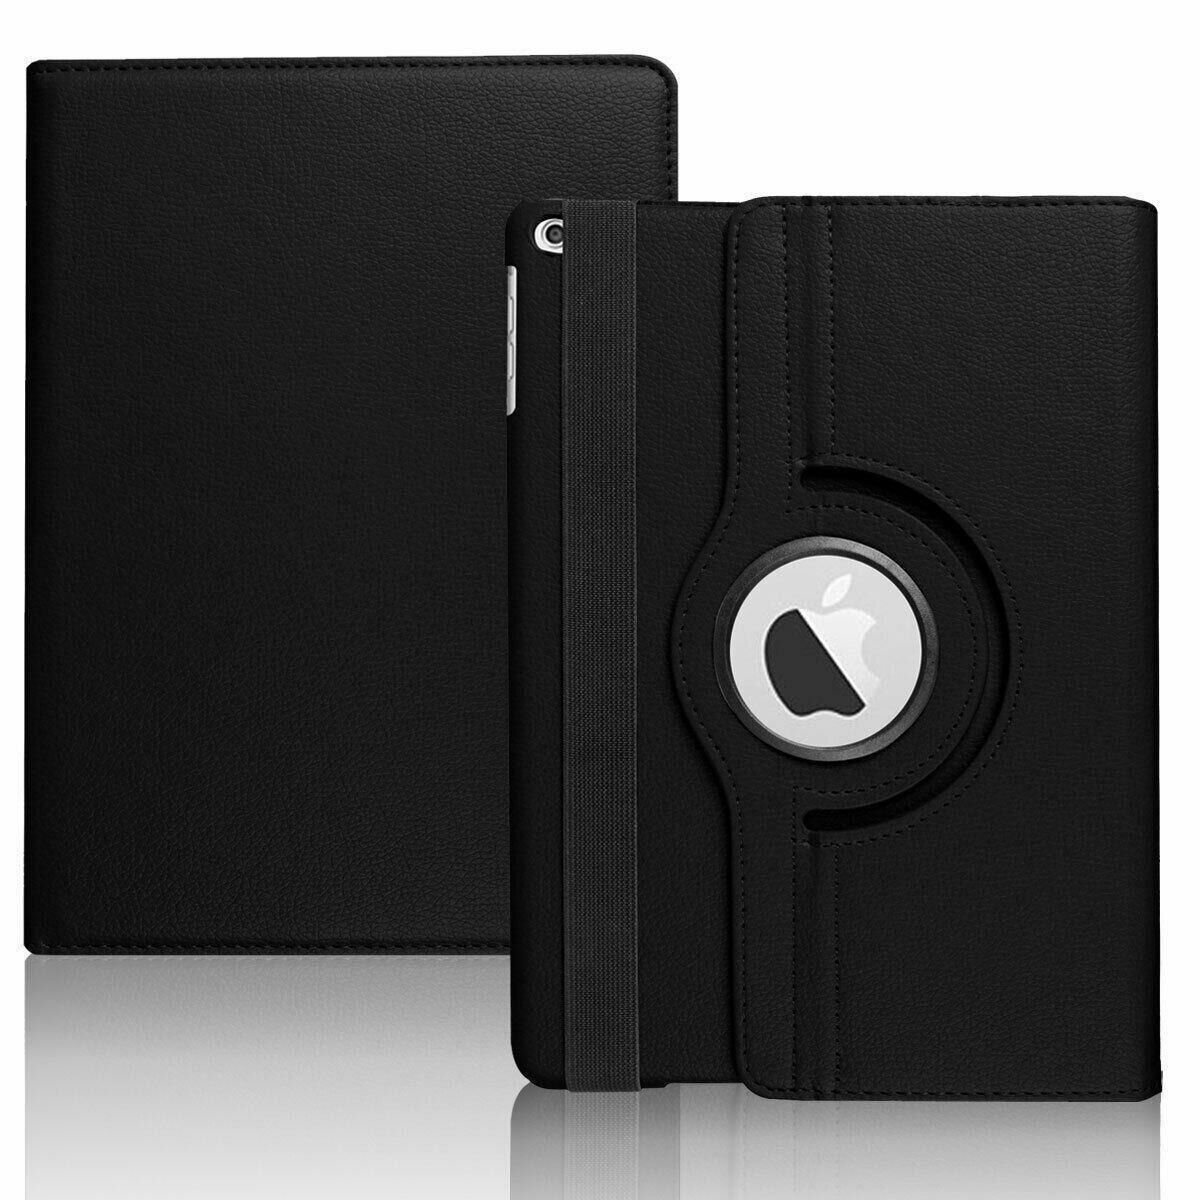 Case For iPad 6th 5th Generation 9.7